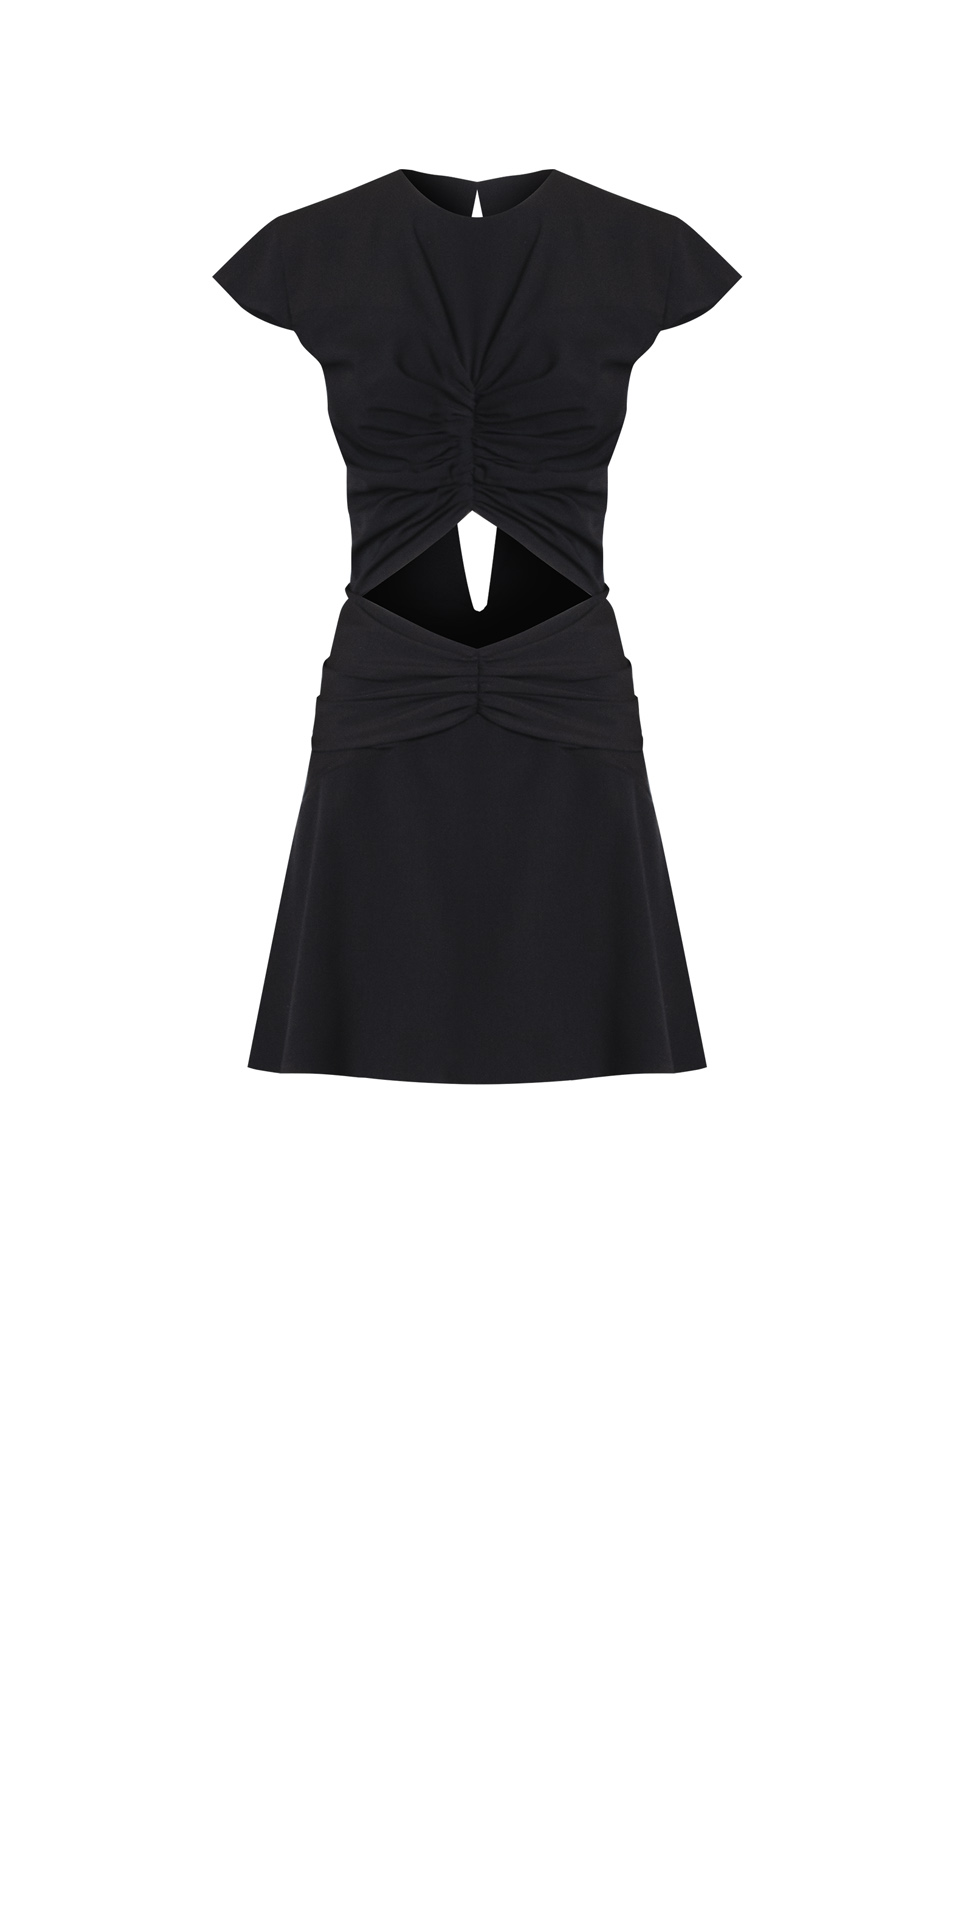 REVERSIBLE – THE BUTTERFLY DRESS CREPE BLACK